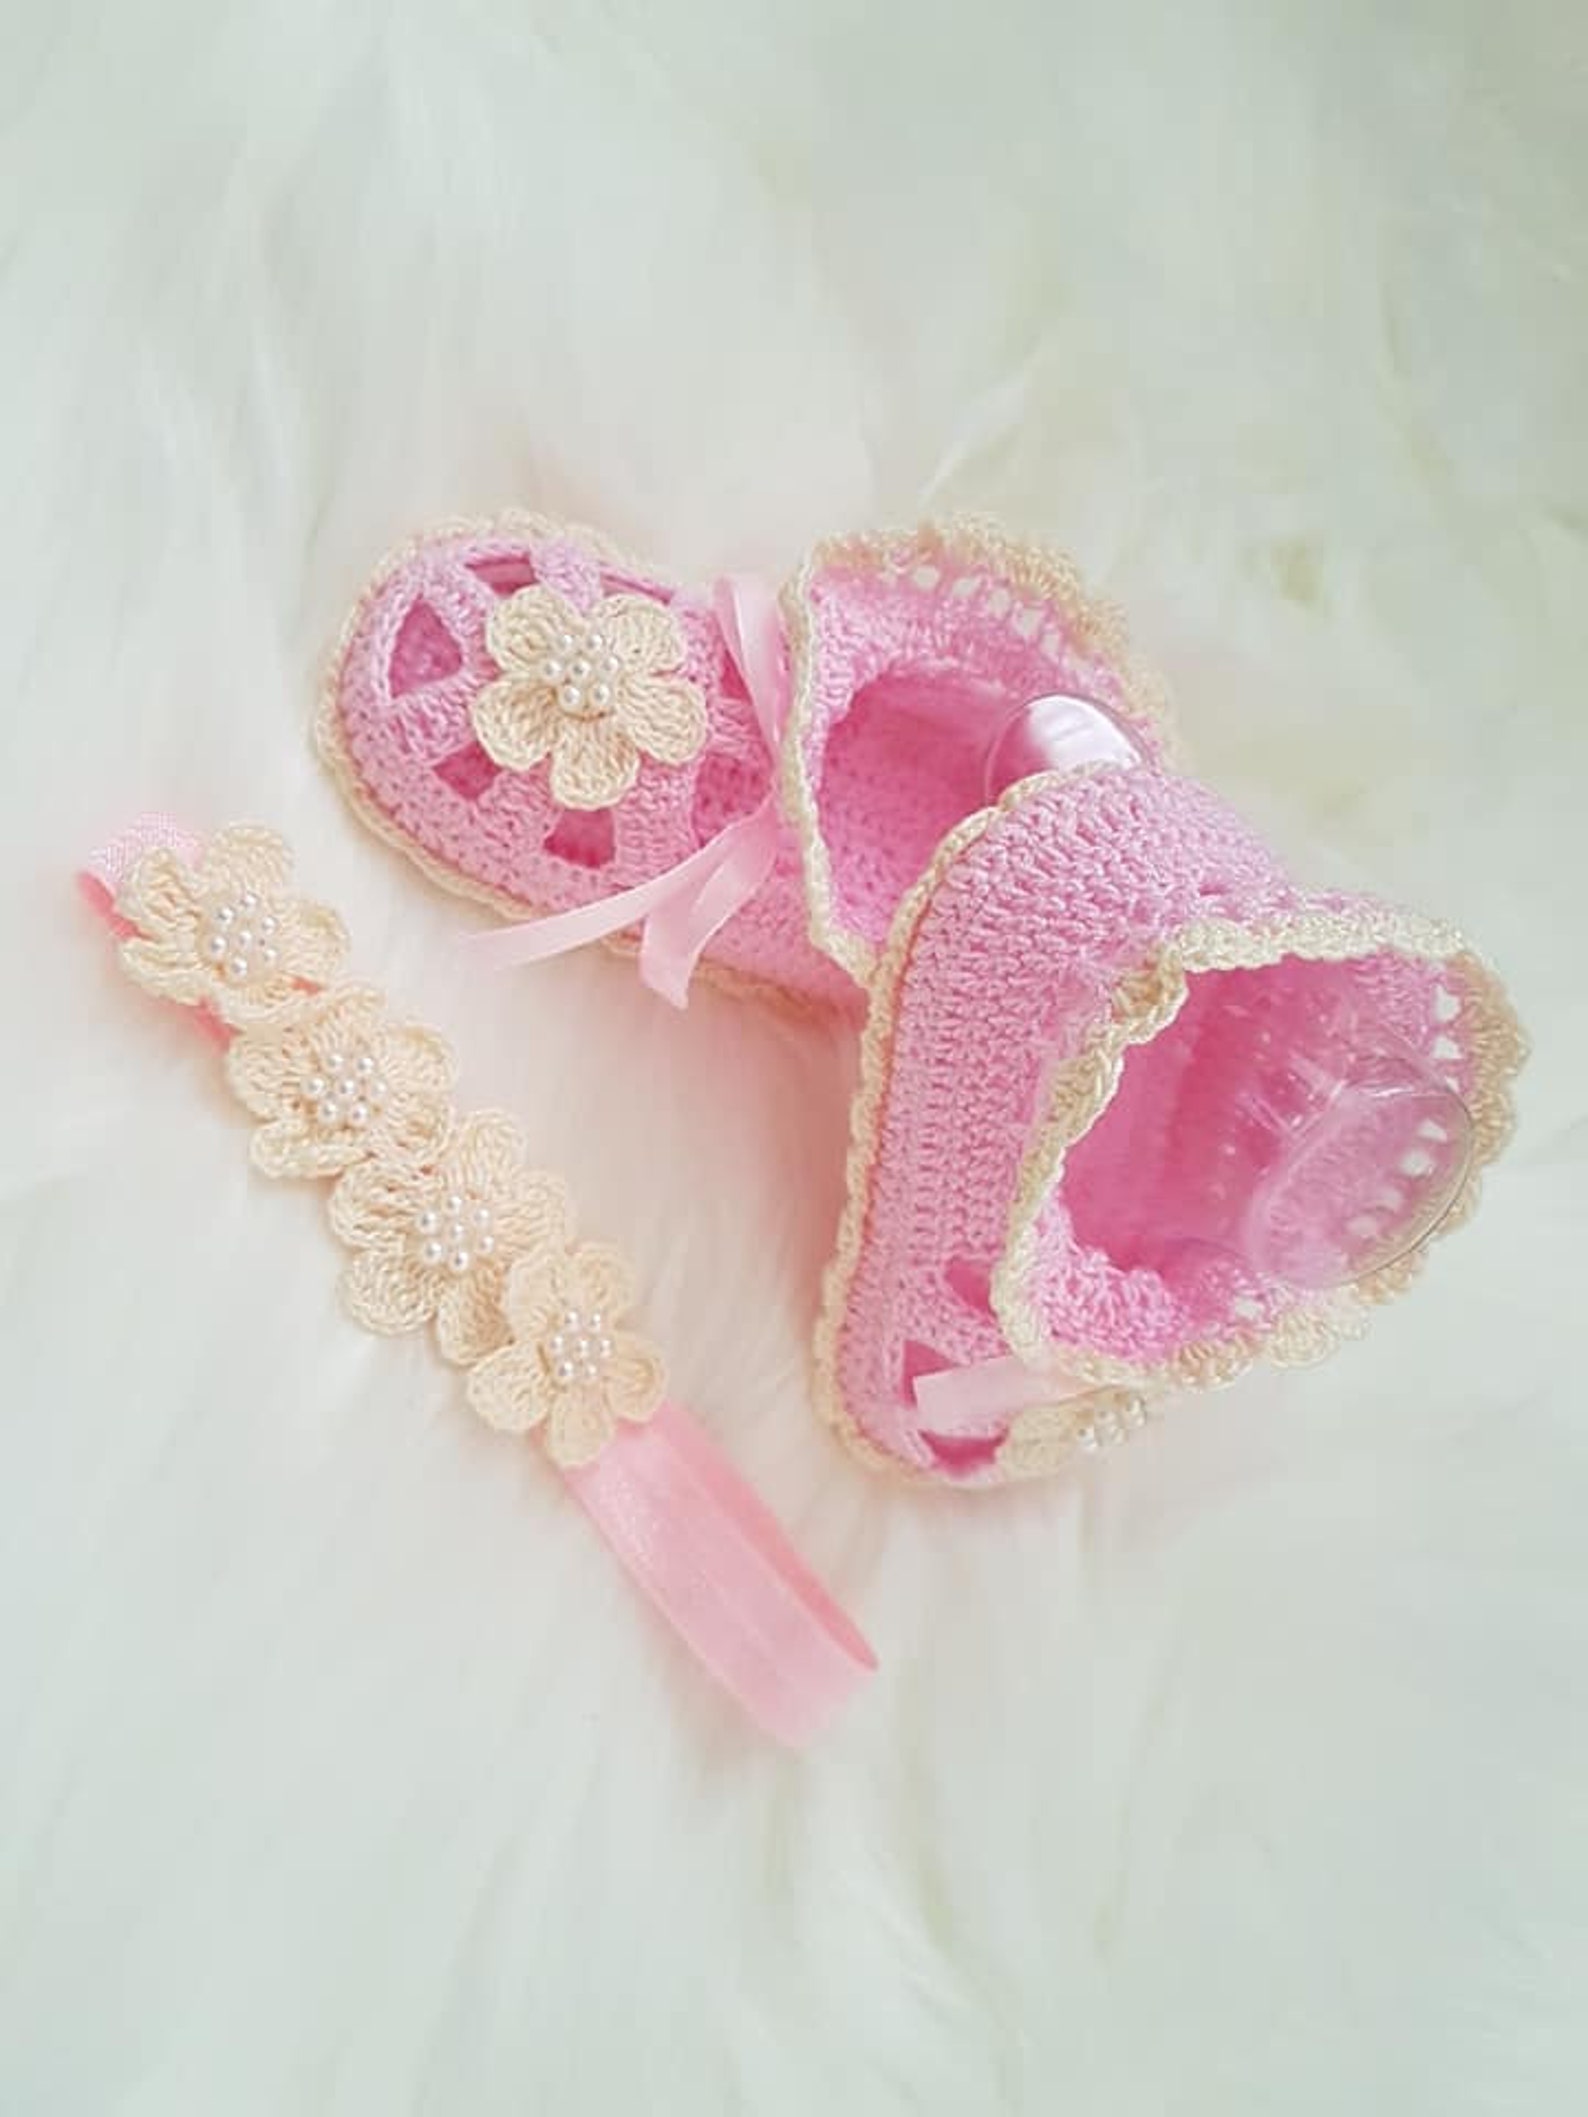 crochet baby booties, baby girl ballet slippers. crochet baby shoes with flower for newborn to 06 months